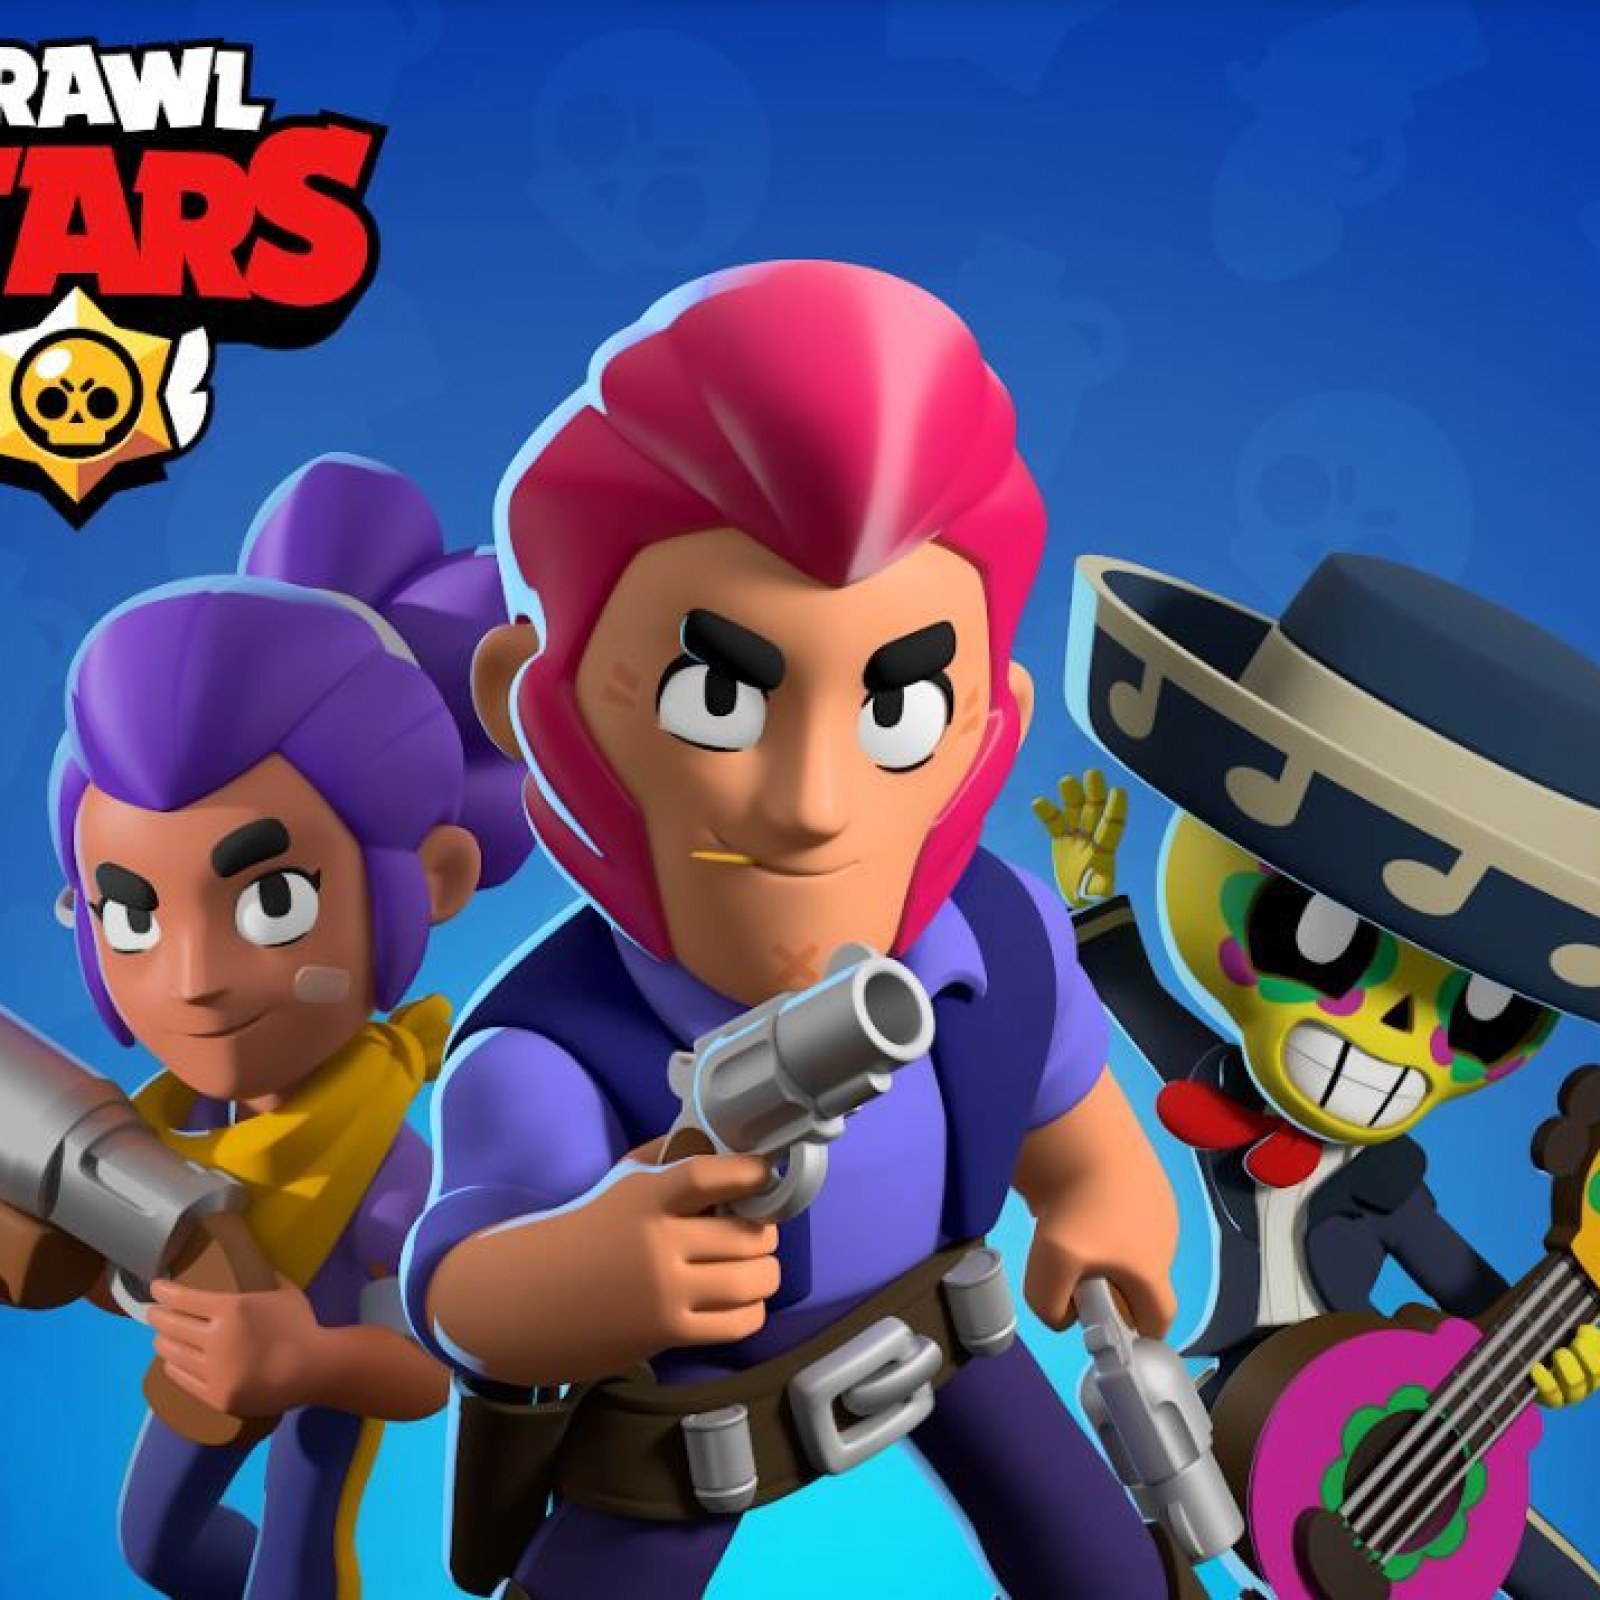 Brawl Stars Tips And Tricks Guide Farm Trophies Earn Brawlers And Unlock Wizard Barley - brawl stars trouble to gwt teophies